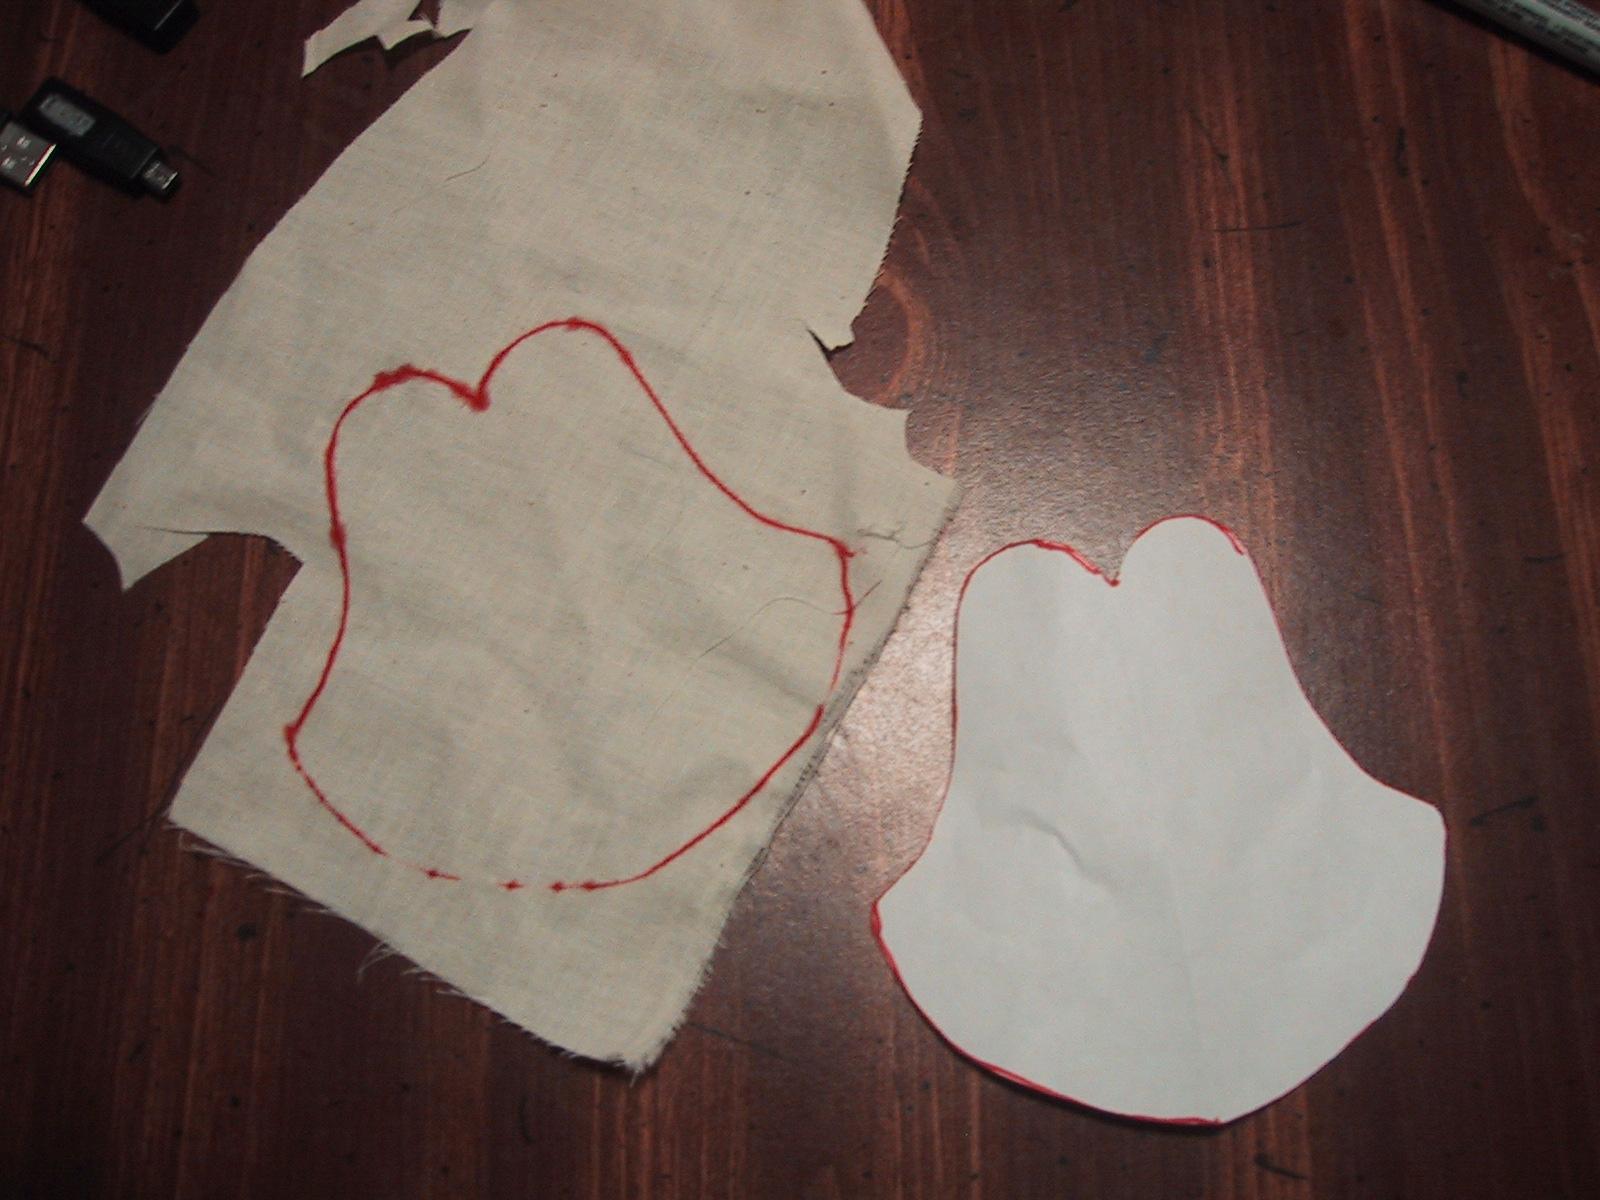 Muslin glove test parts being transfered to paper pattern pieces